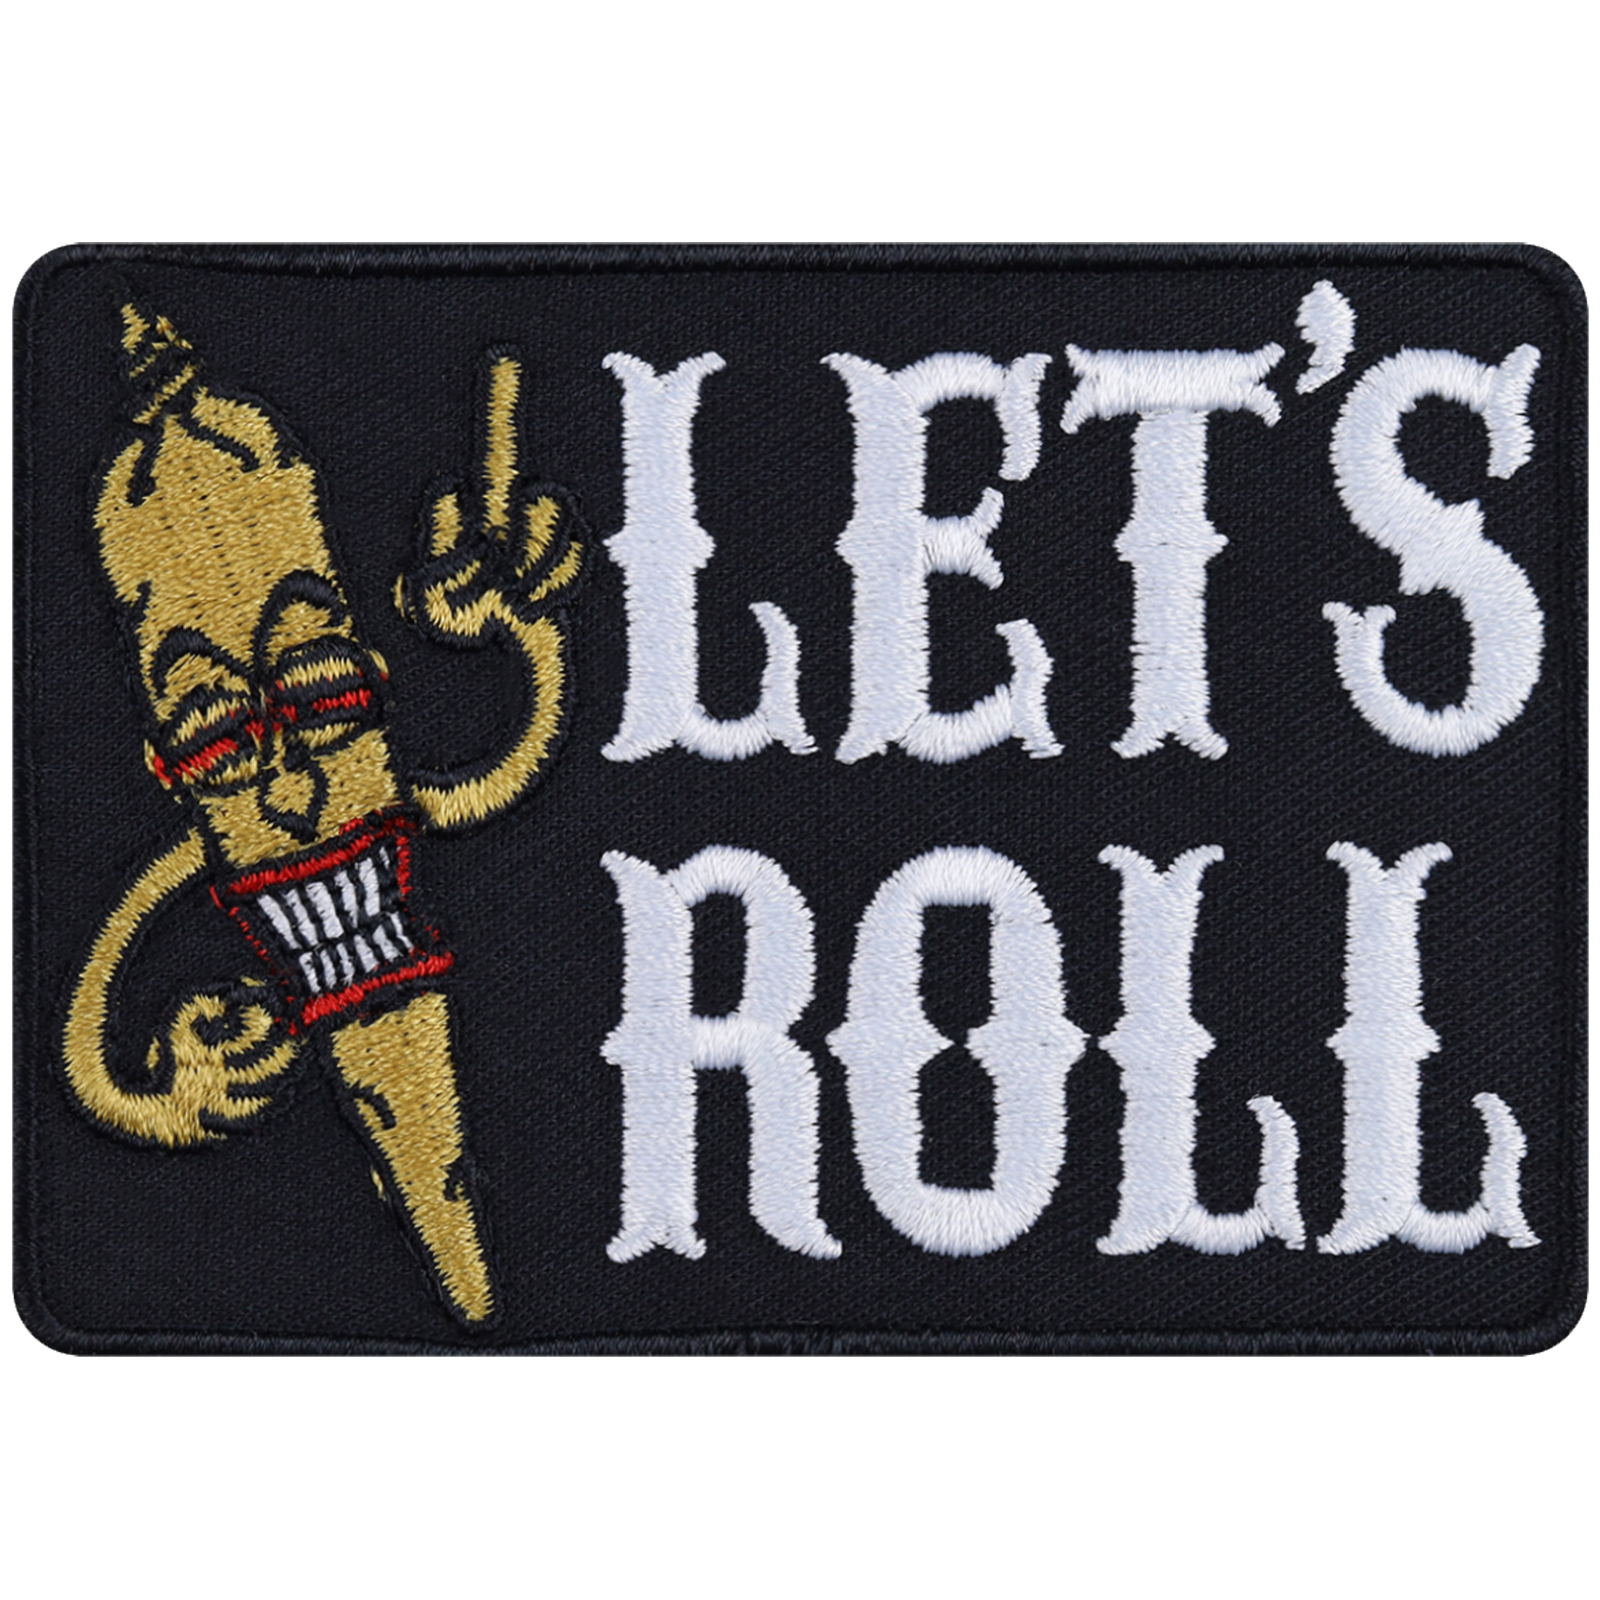 Let's roll - Patch